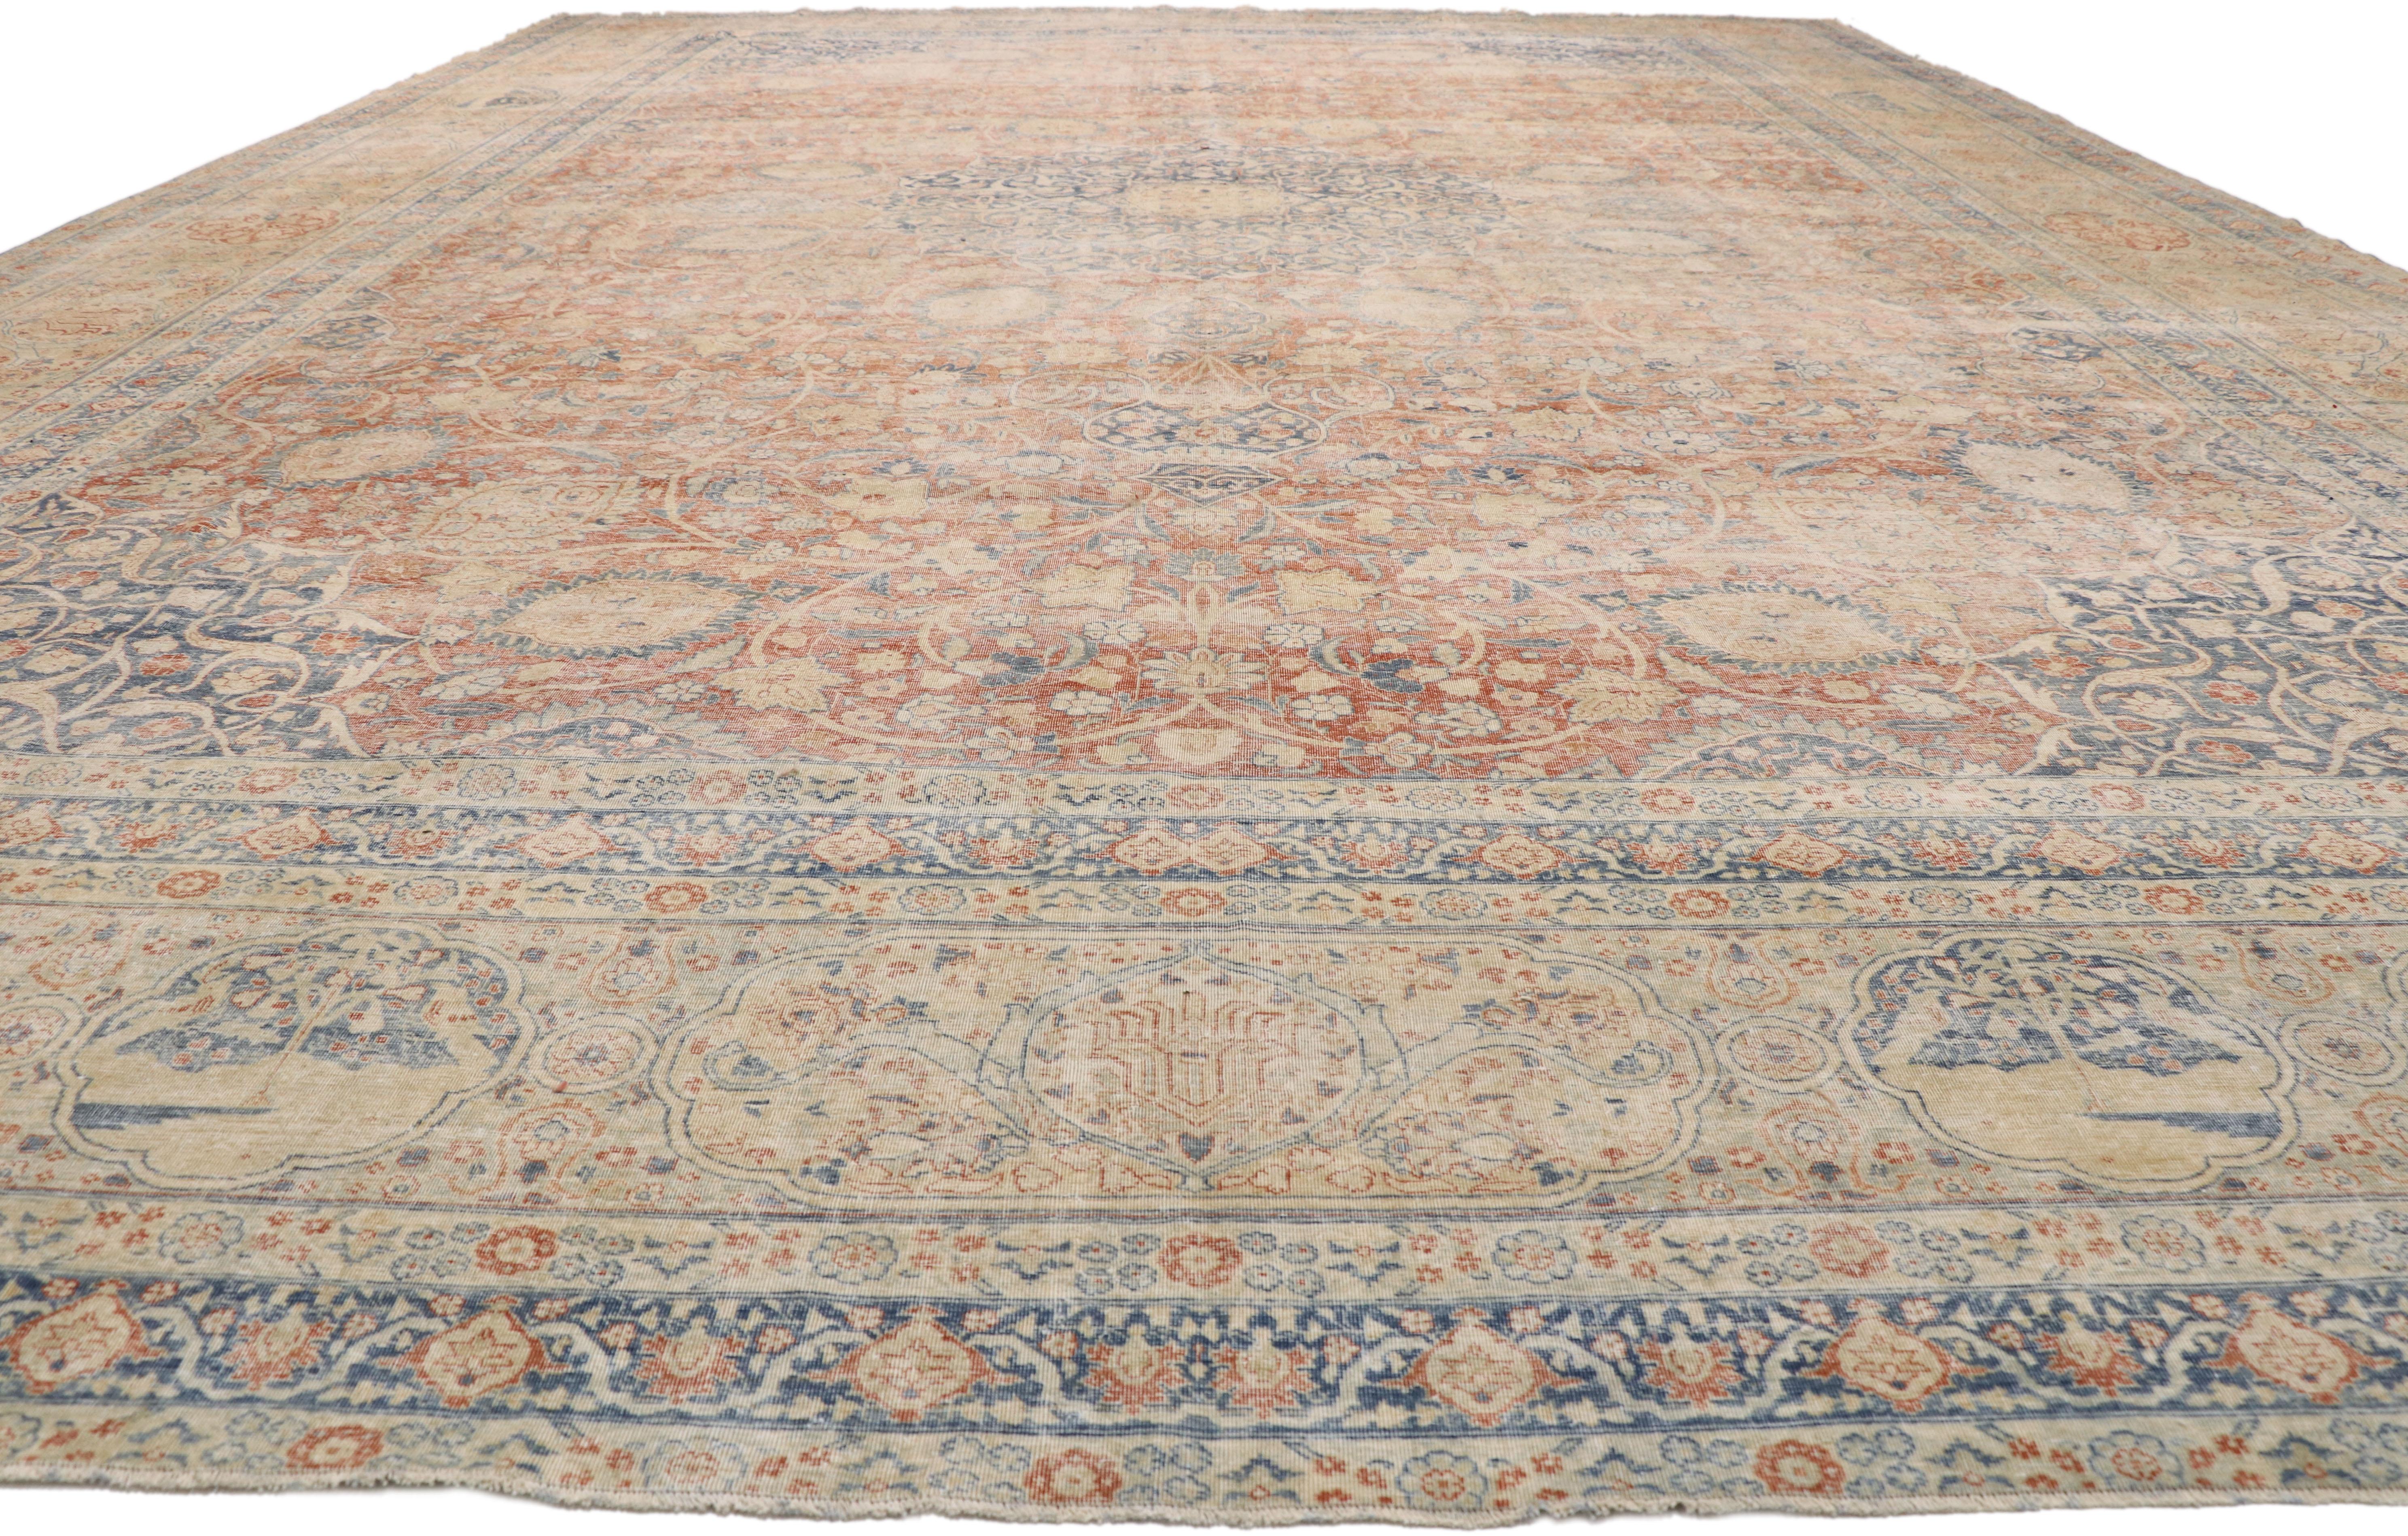 Hand-Knotted Distressed Antique Persian Tabriz Palace Rug with Rustic Relaxed Federal Style